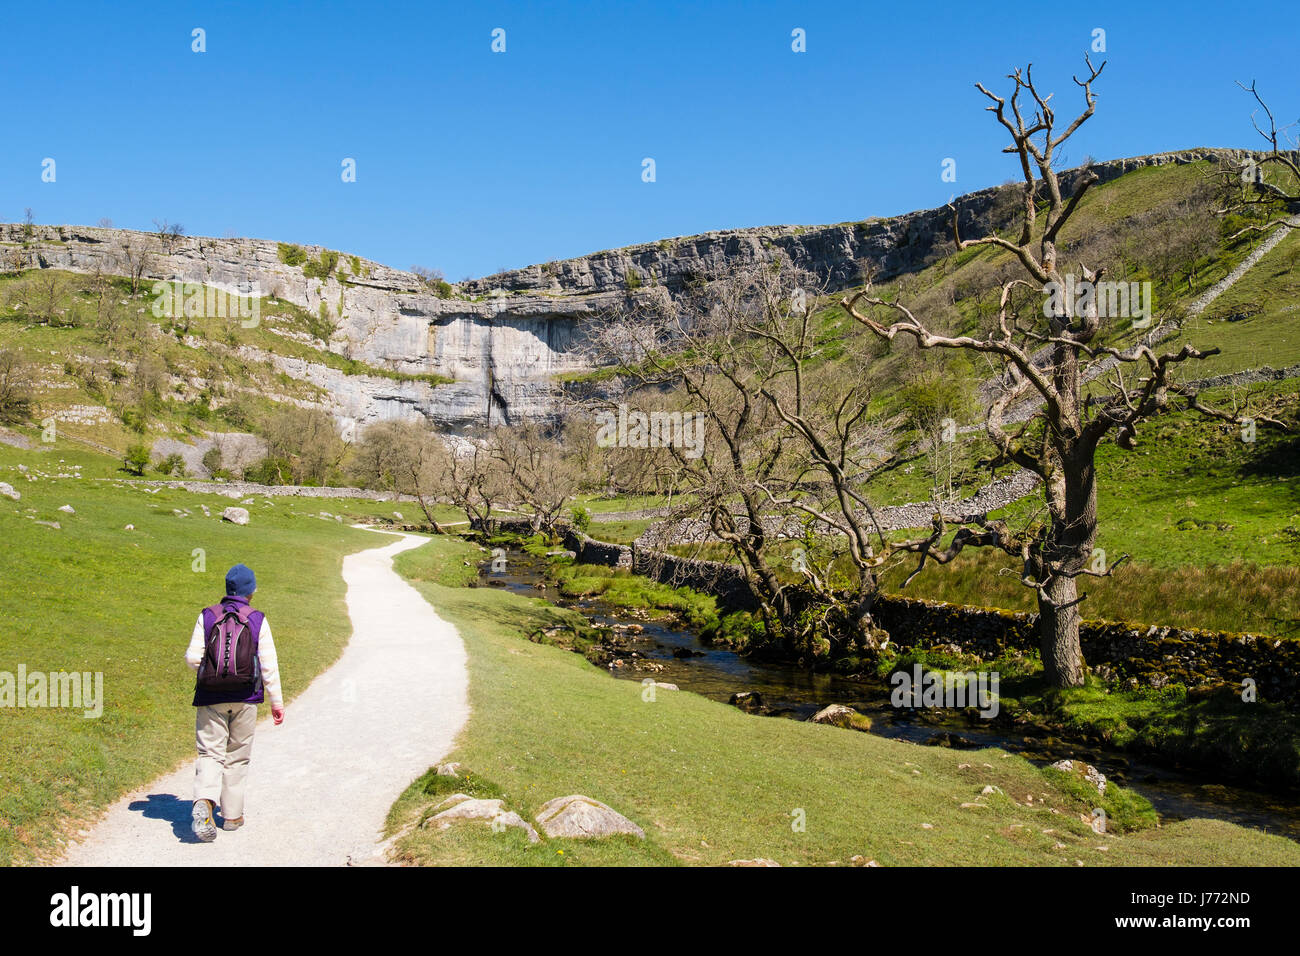 Hiker hiking on footpath to Malham Cove following the Pennine Way. Malham Malhamdale Yorkshire Dales National Park North Yorkshire England UK Britain Stock Photo